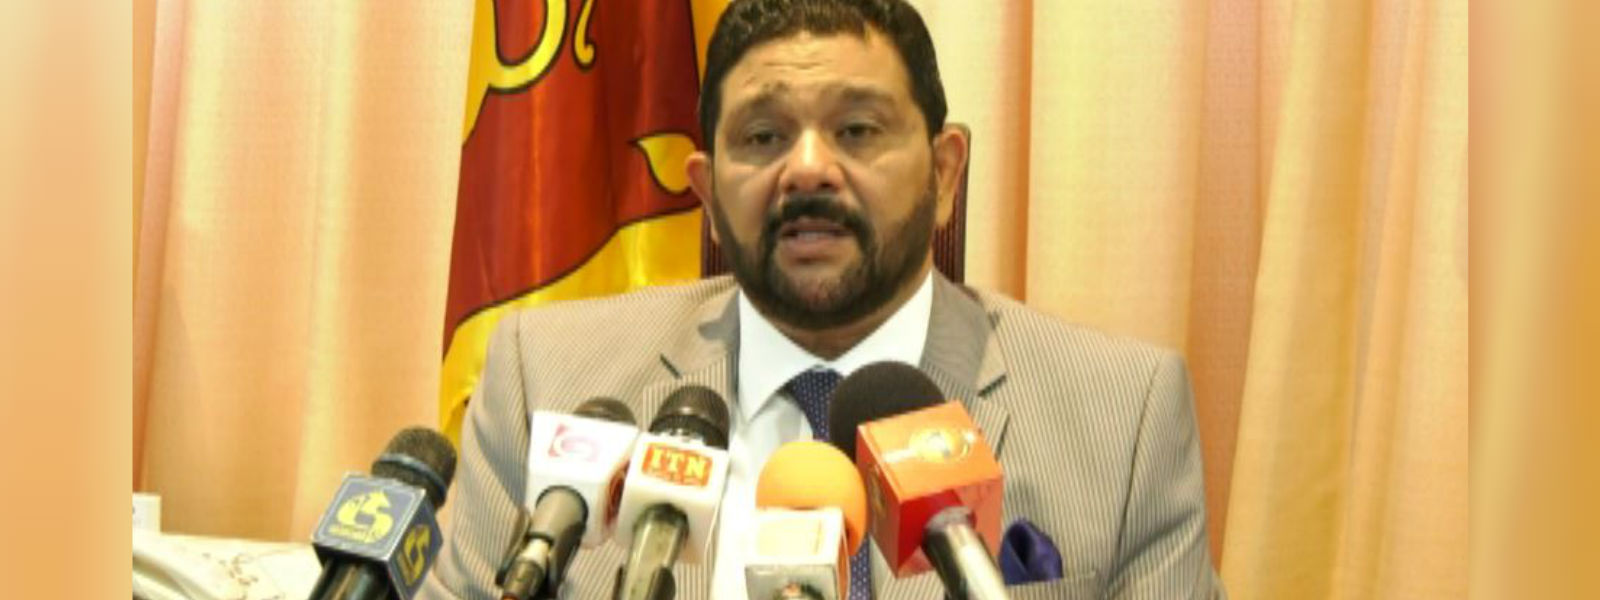 Azath thanks the president for his initiatives